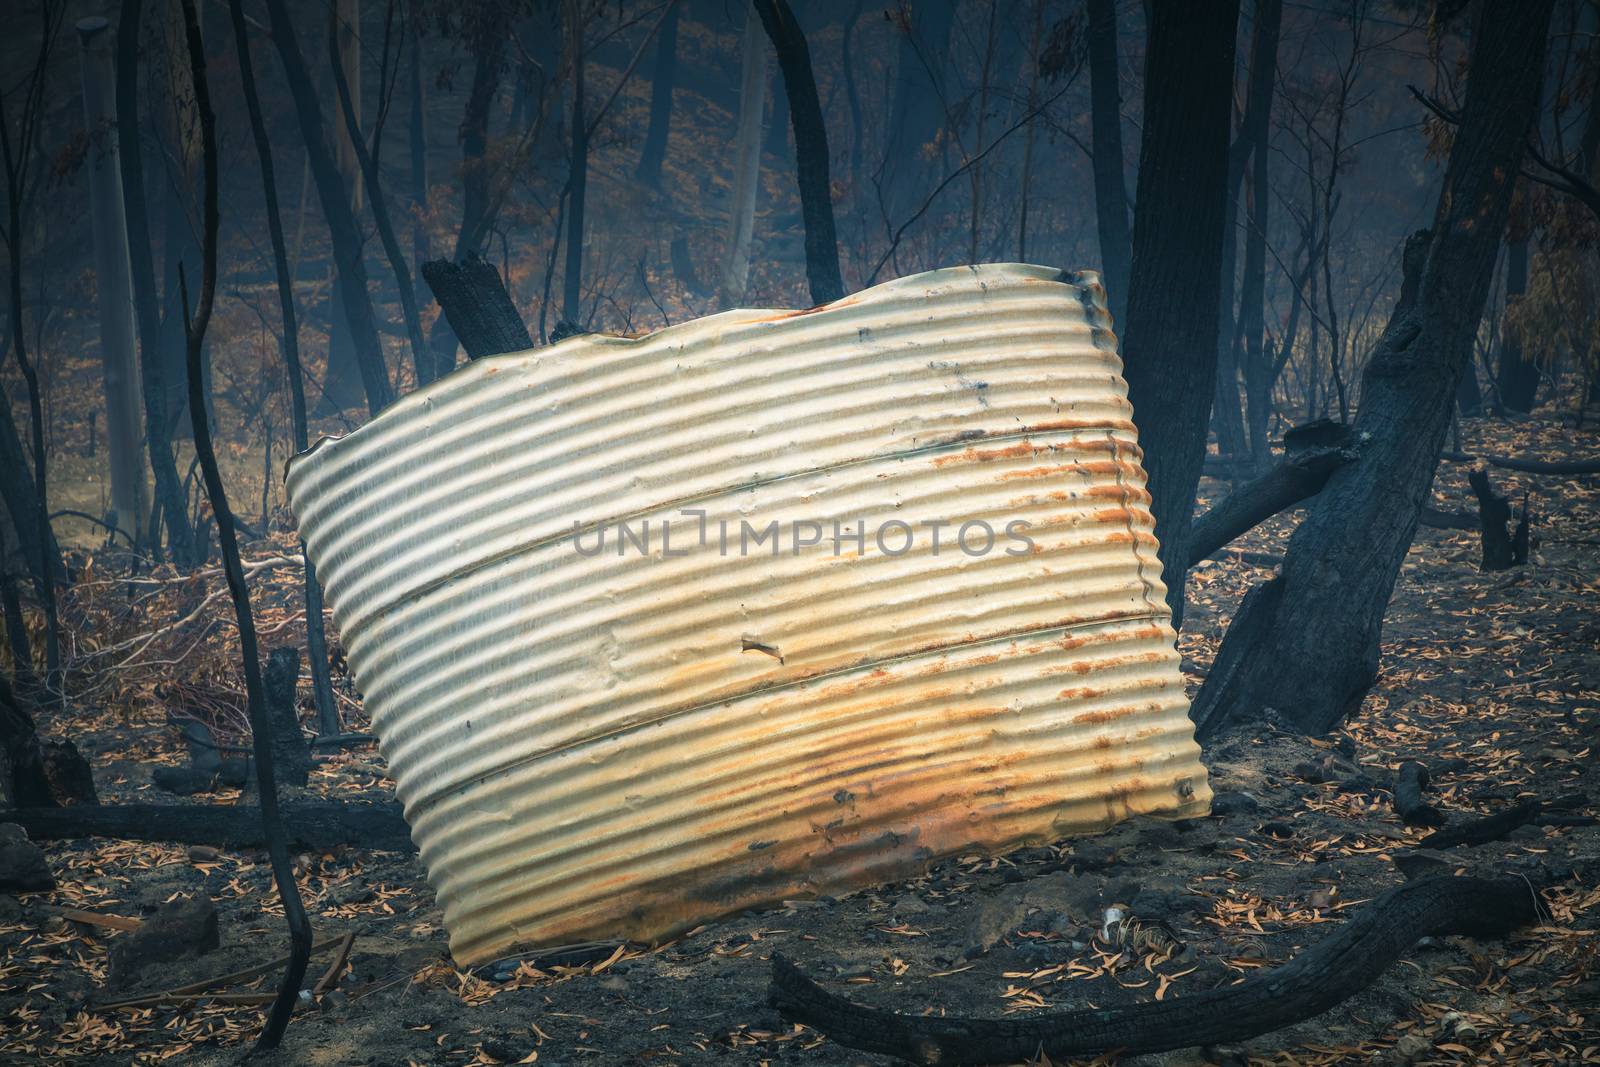 A water tank and gum trees burnt by bushfire in The Blue Mountains in Australia